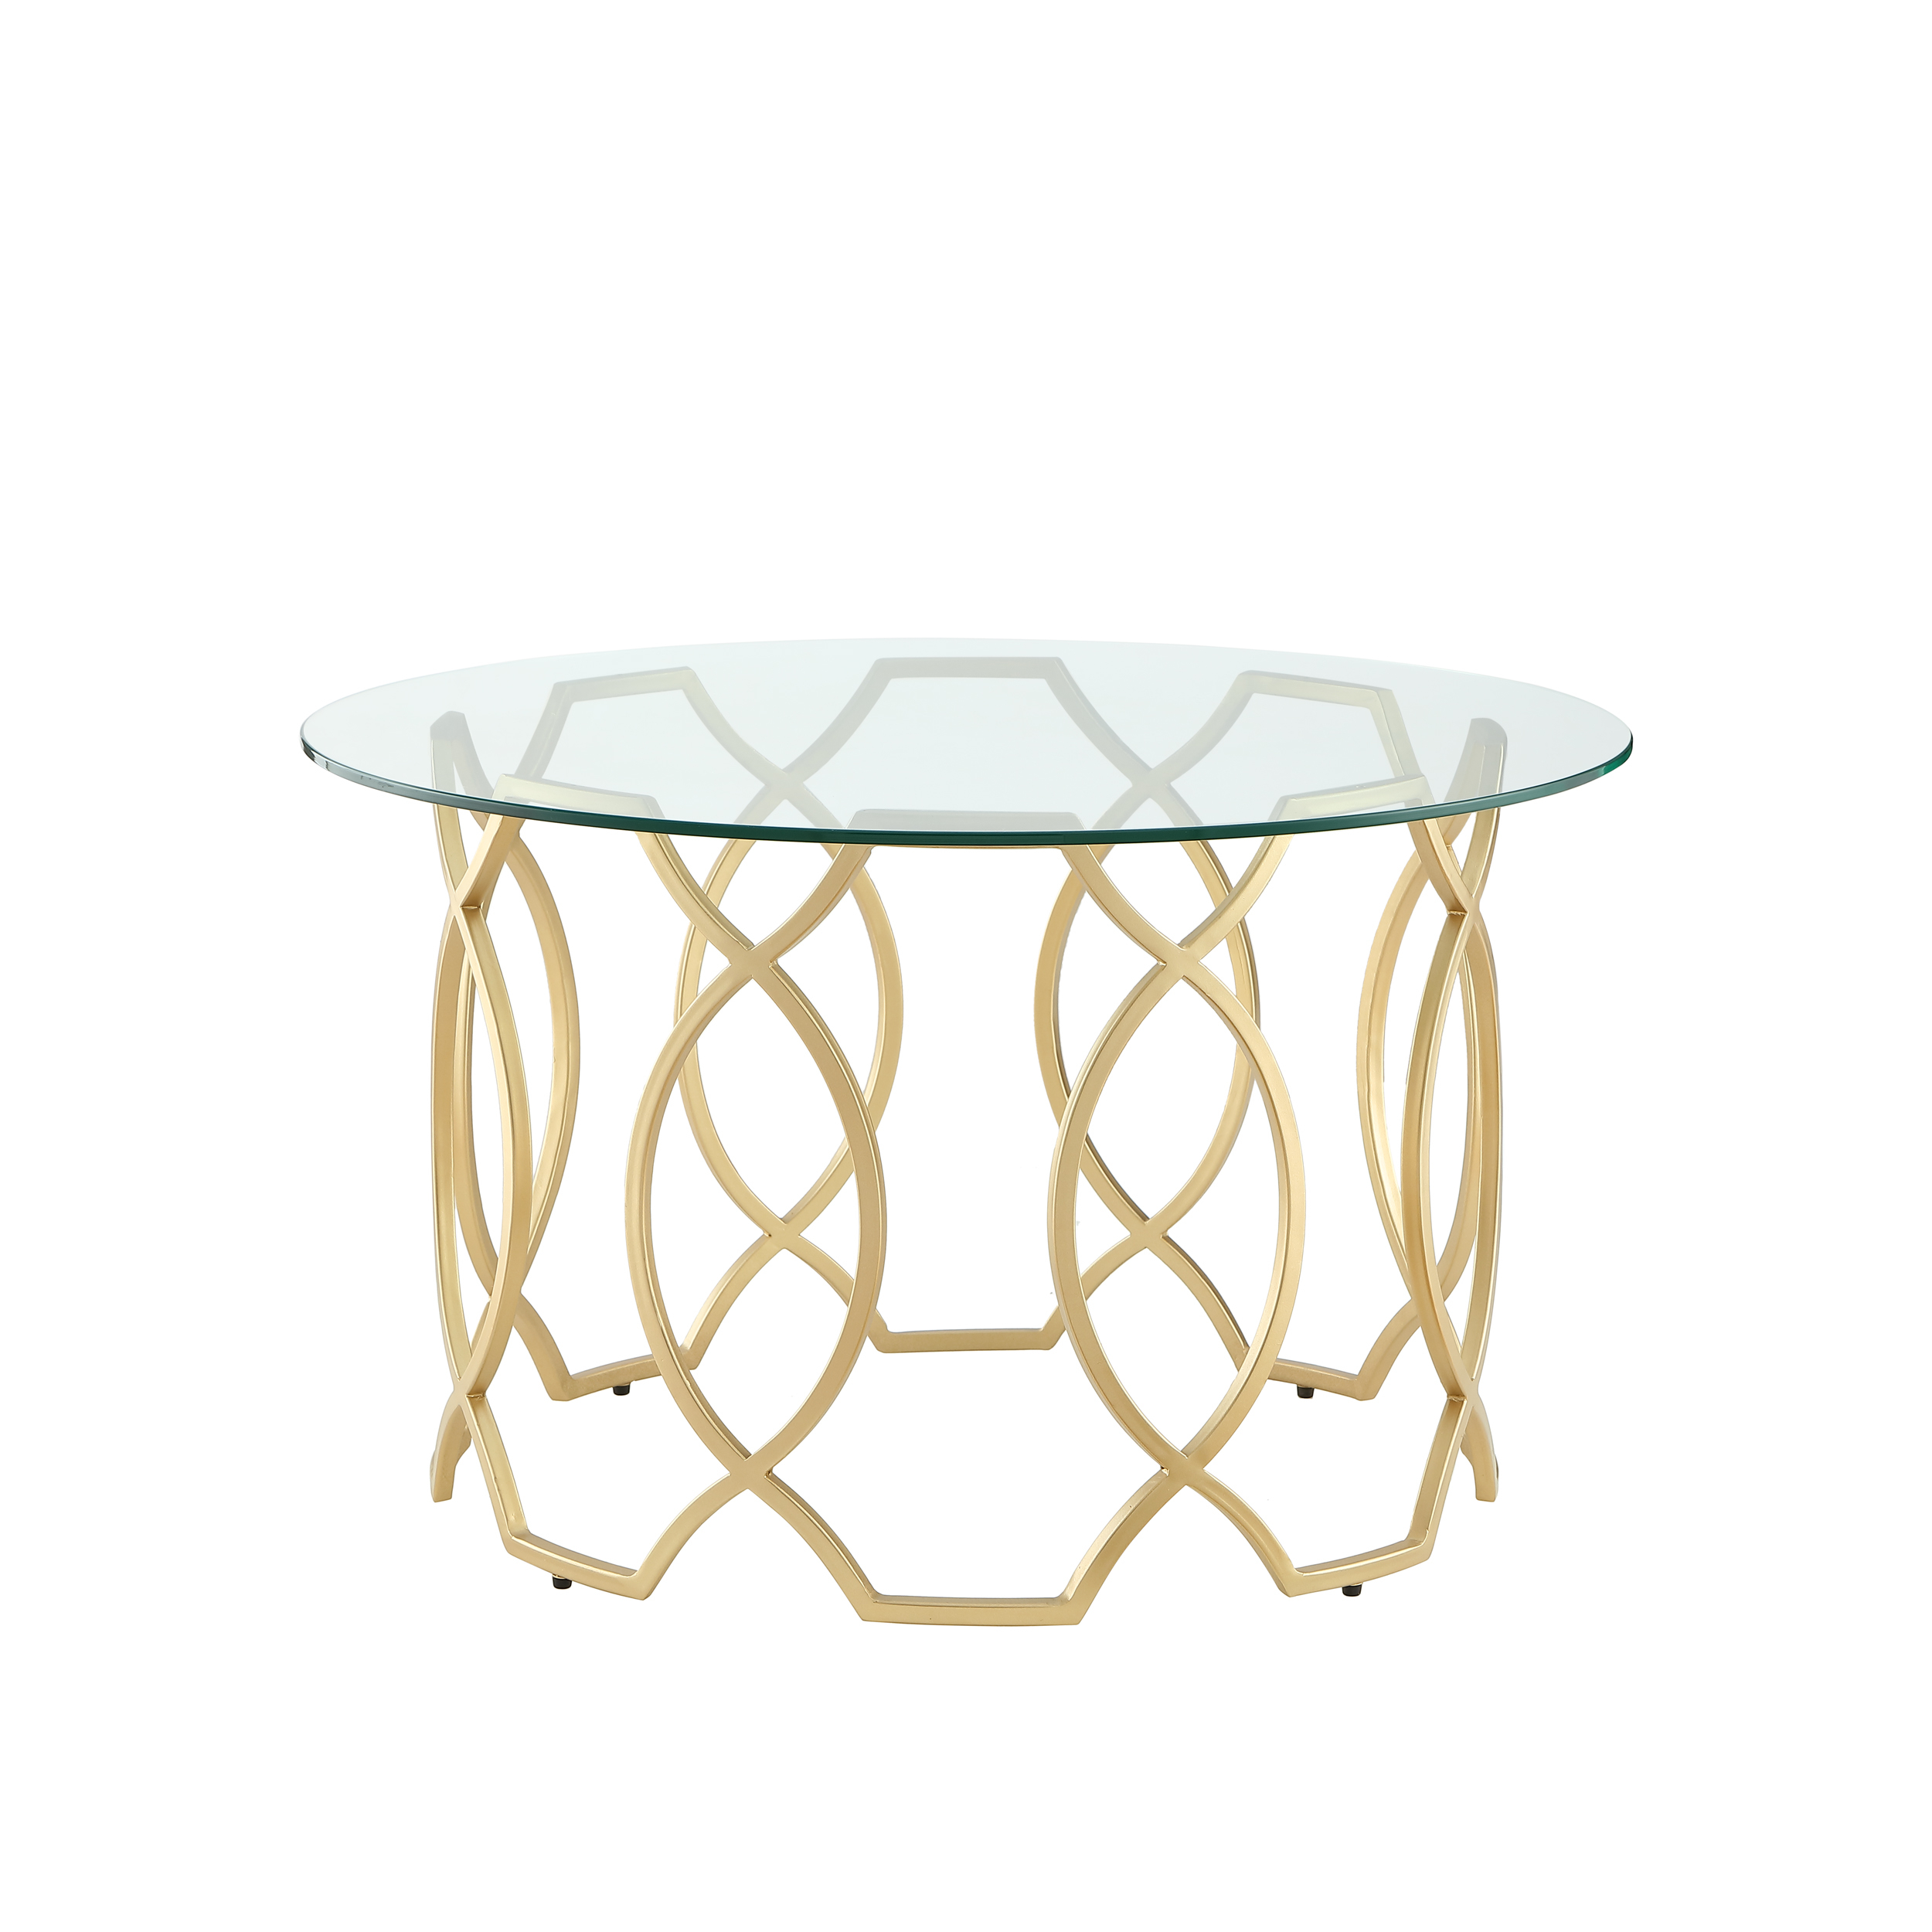 Sikara Round Modern Coffee Table- Durable Clear-Glass Top-Elegant Frame Design-By Nicole Miller - Silver